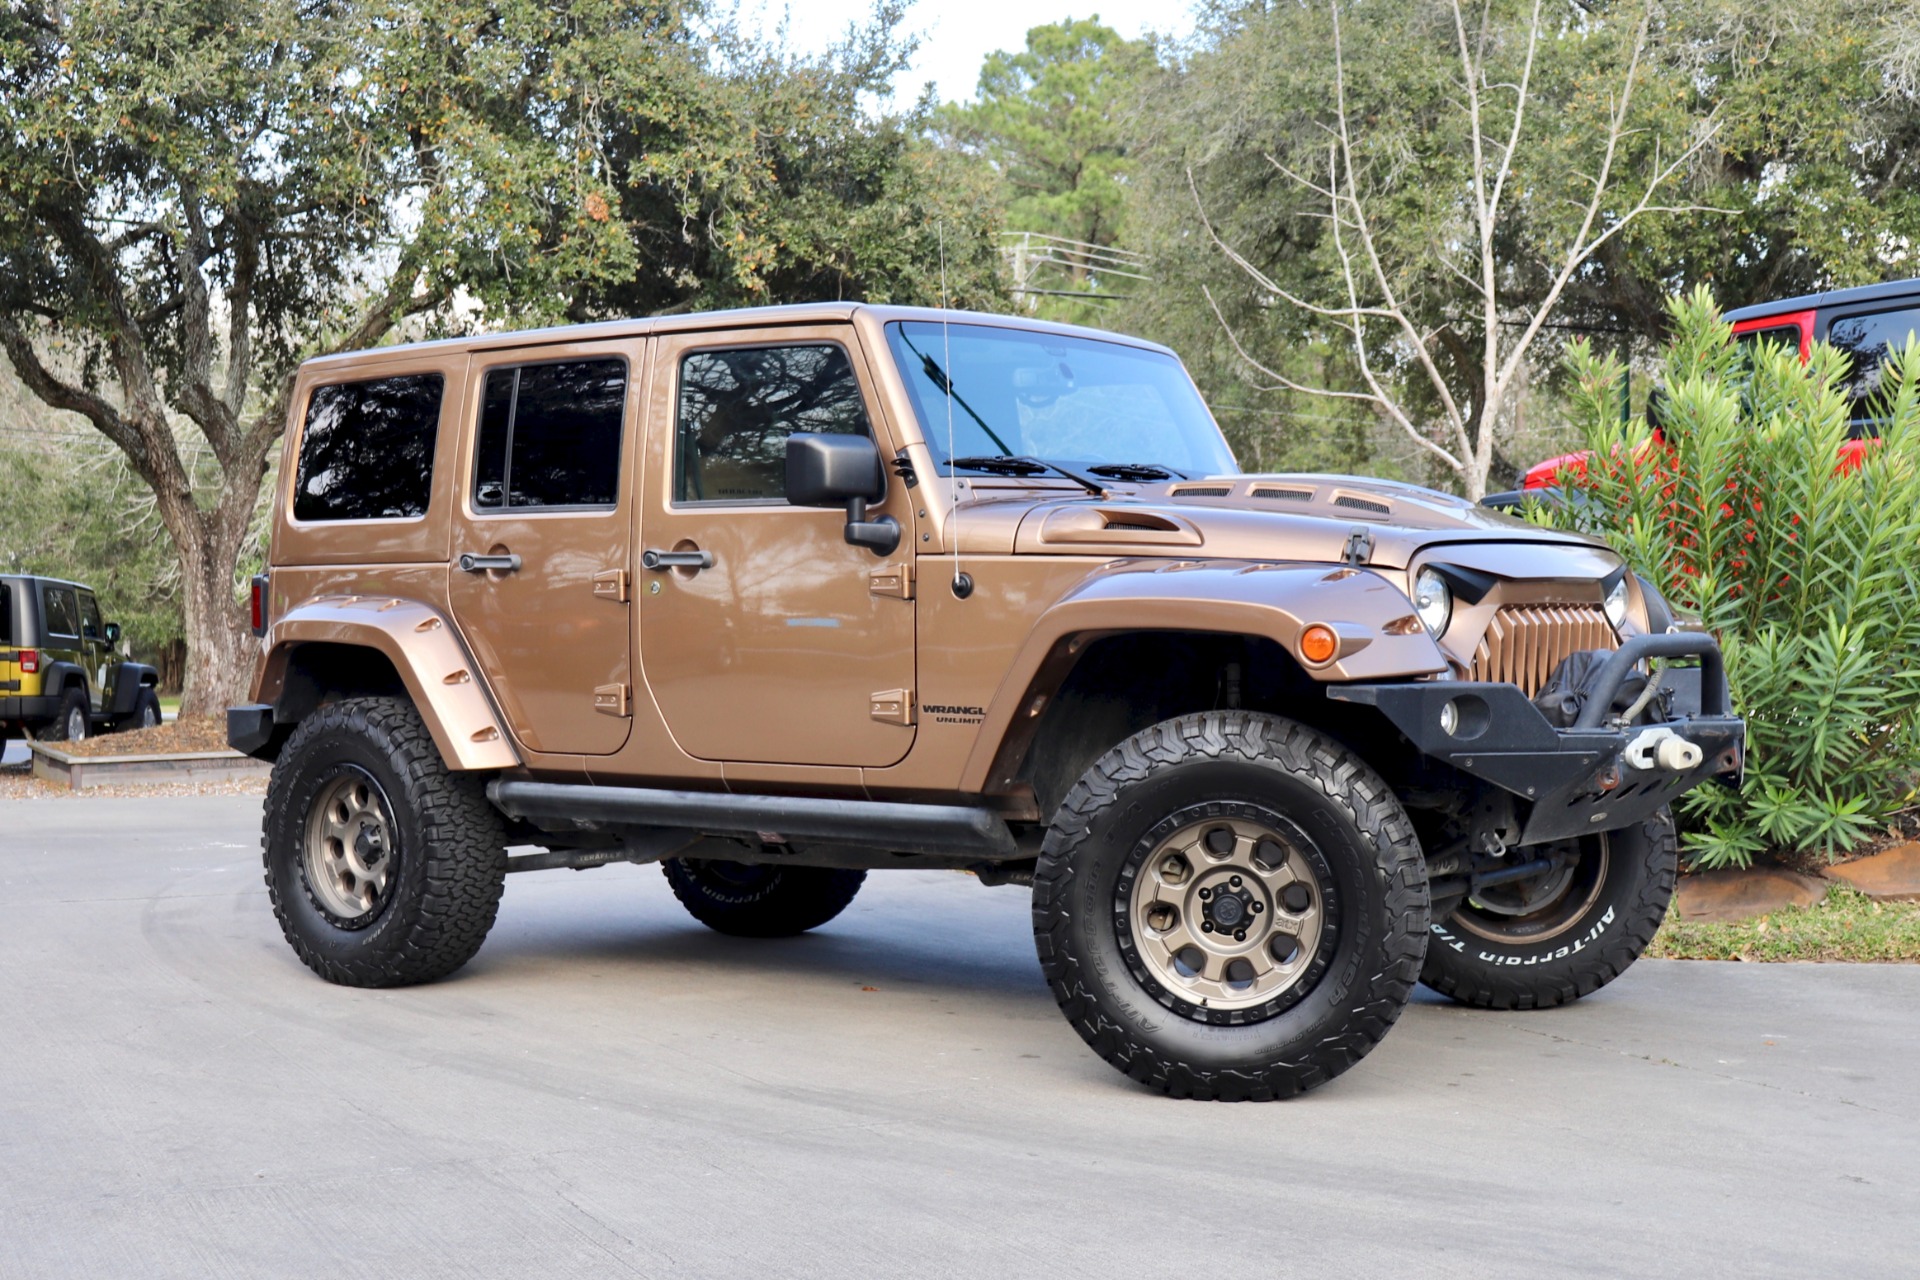 Used 2015 Jeep Wrangler Unlimited Rubicon For Sale ($39,995) | Select Jeeps  Inc. Stock #631111